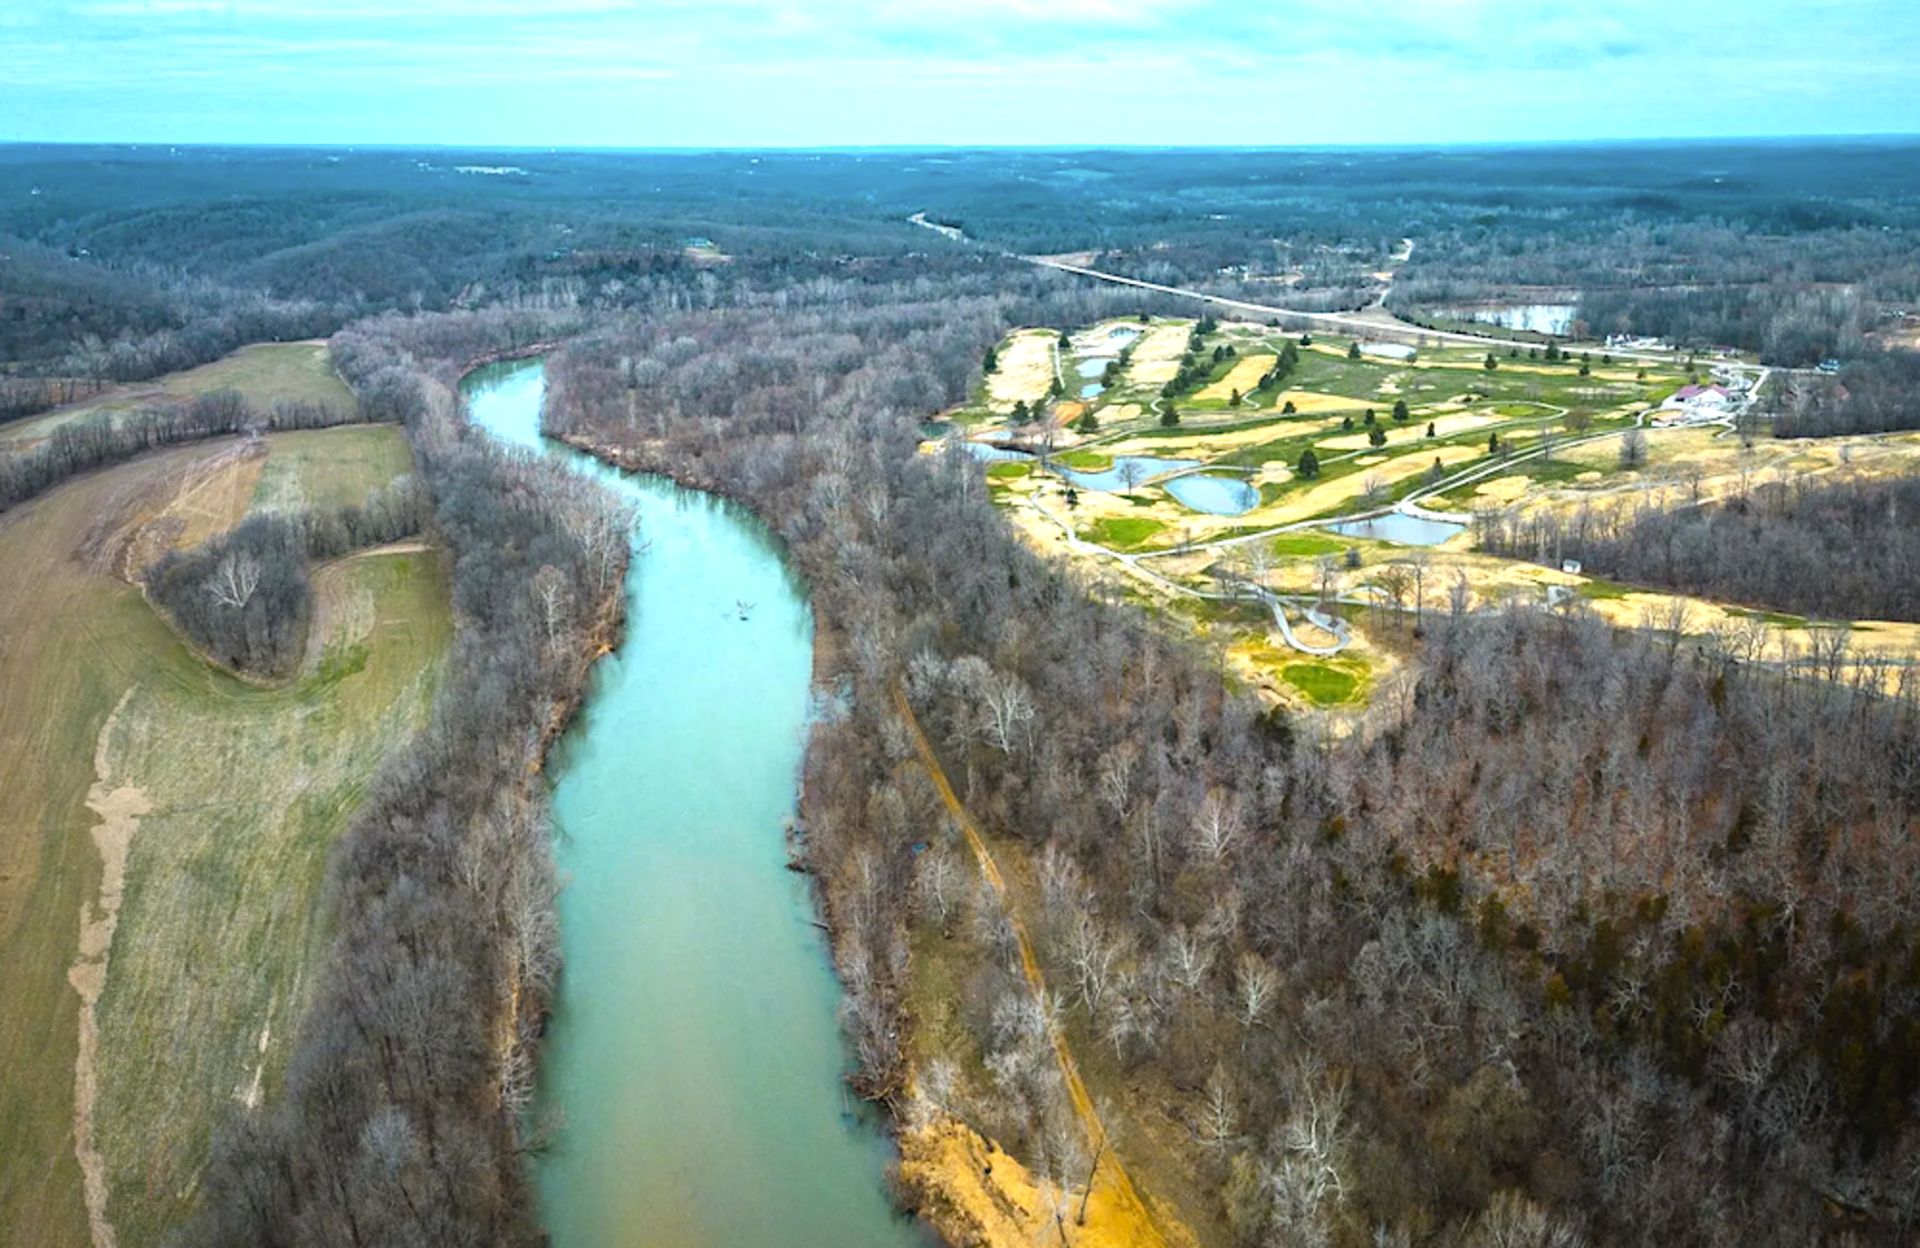 Easy Access to this Camping Spot in St. Clair, Missouri! - Image 2 of 15